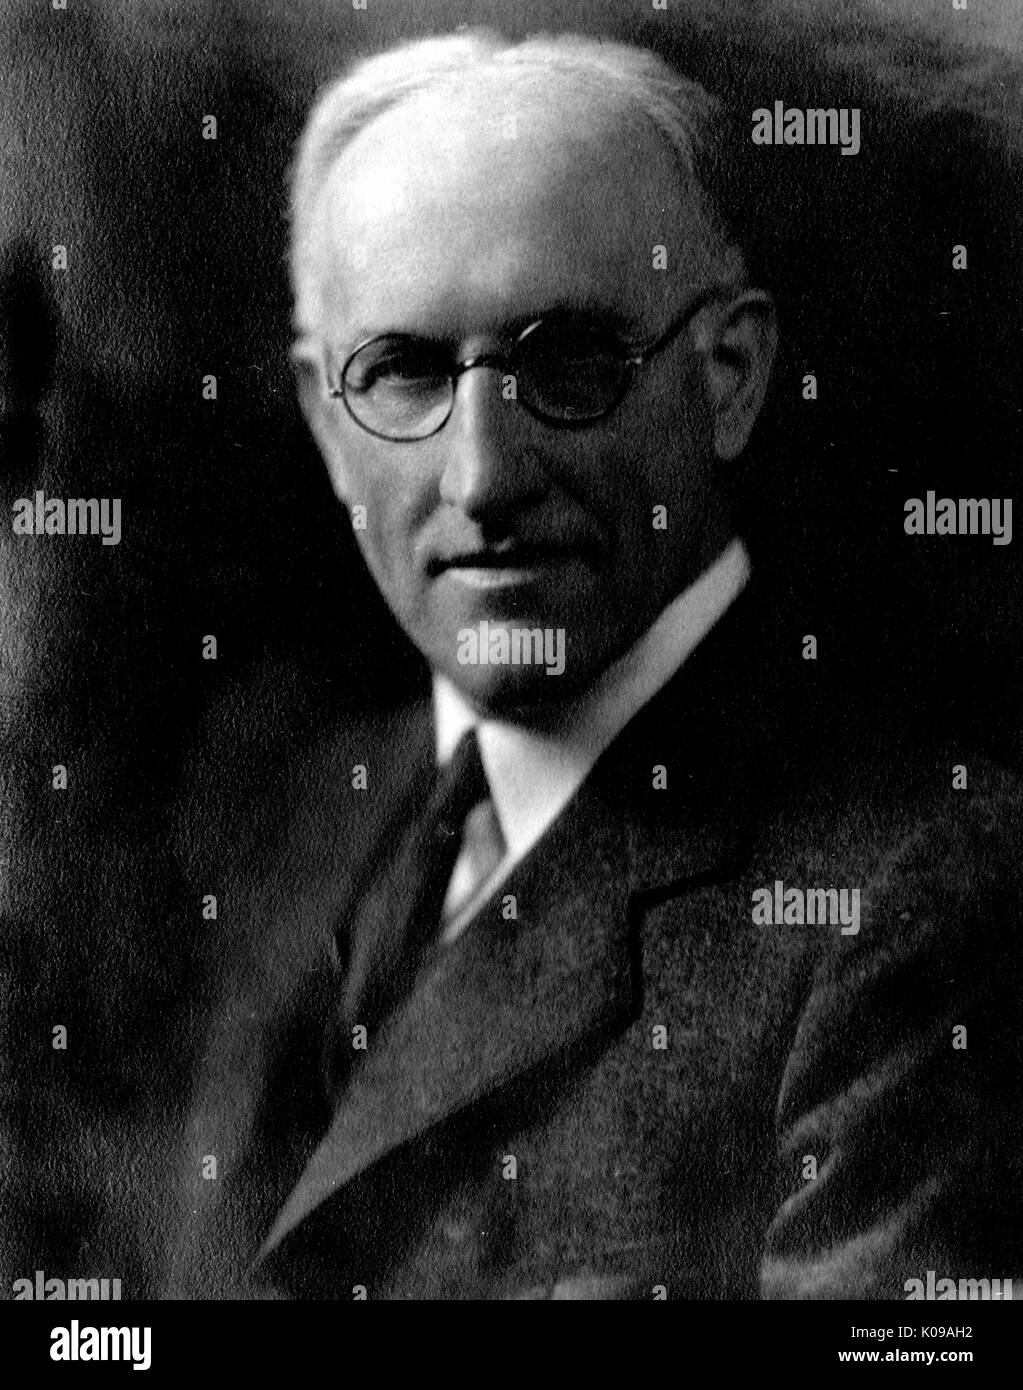 Half-length of Dr. Samuel Mast, biology faculty member at the Johns Hopkins University, wearing a dark three piece suit and a dark tie with a white shirt and circular dark glasses, in front of a backdrop, with a serious facial expression. 1935. Stock Photo